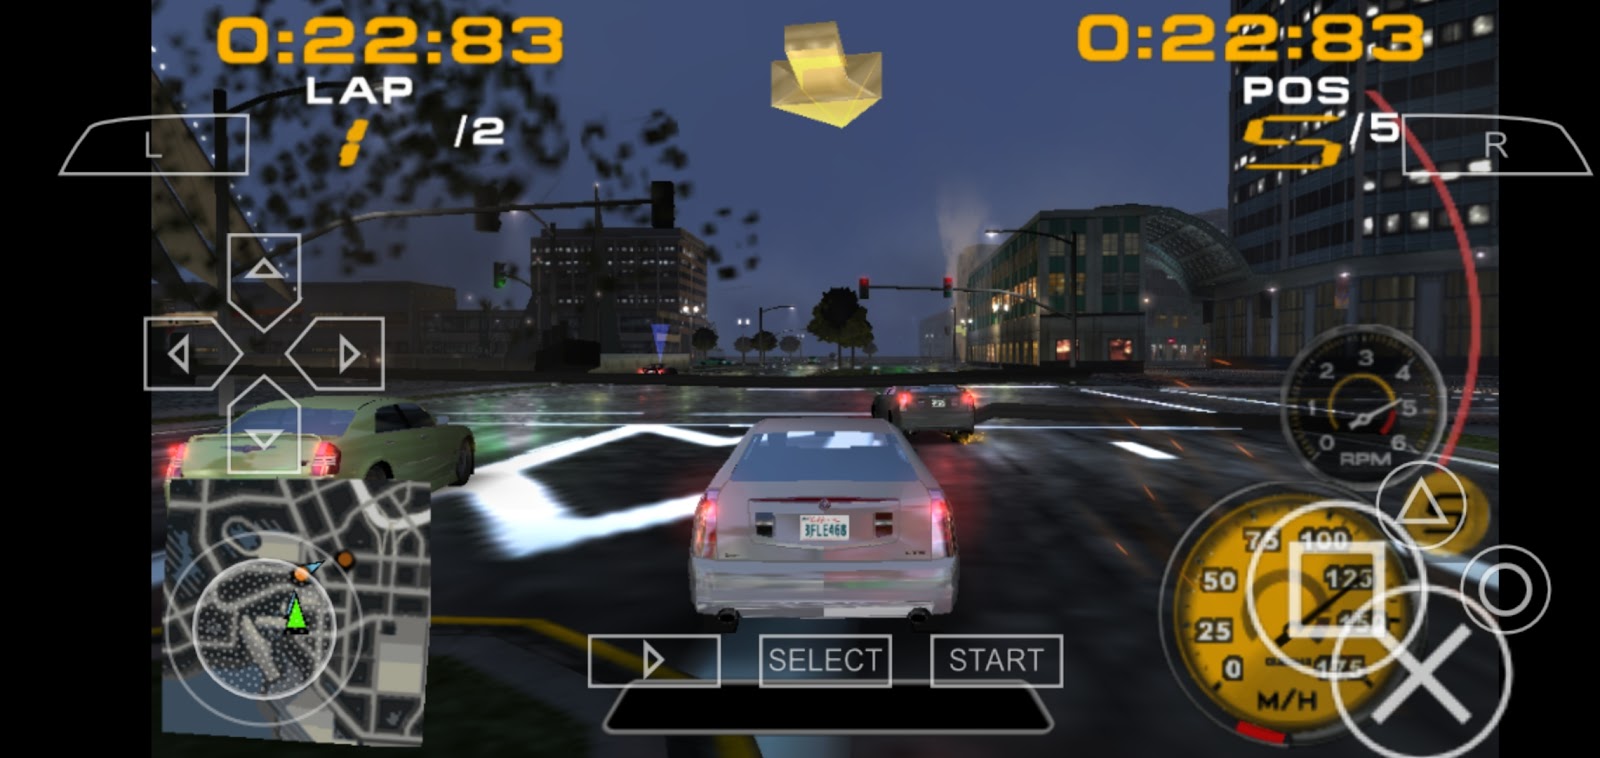 Midnight Club 3 DUB Edition PSP ISO PPSSPP Free Download #110 - MovGameZone  - Android Game PSP ISO PPSSPP Games, PPSSPP Mod Games and PPSSPP Settings.